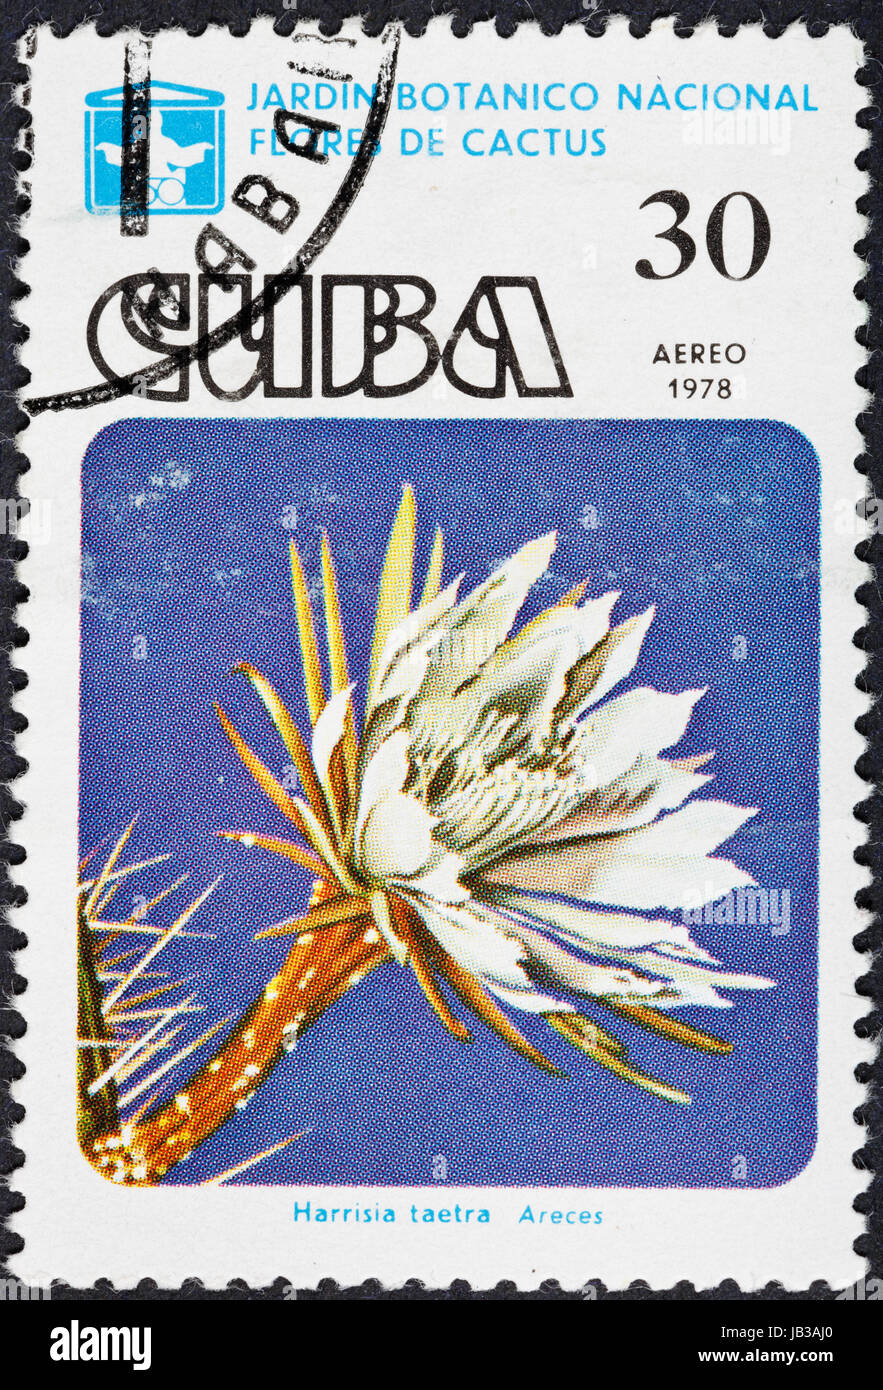 CUBA - CIRCA 1978: A postage stamp printed in the Cuba shows blossoming of Harrisia taetra cactus in National botanical garden, circa 1978 Stock Photo